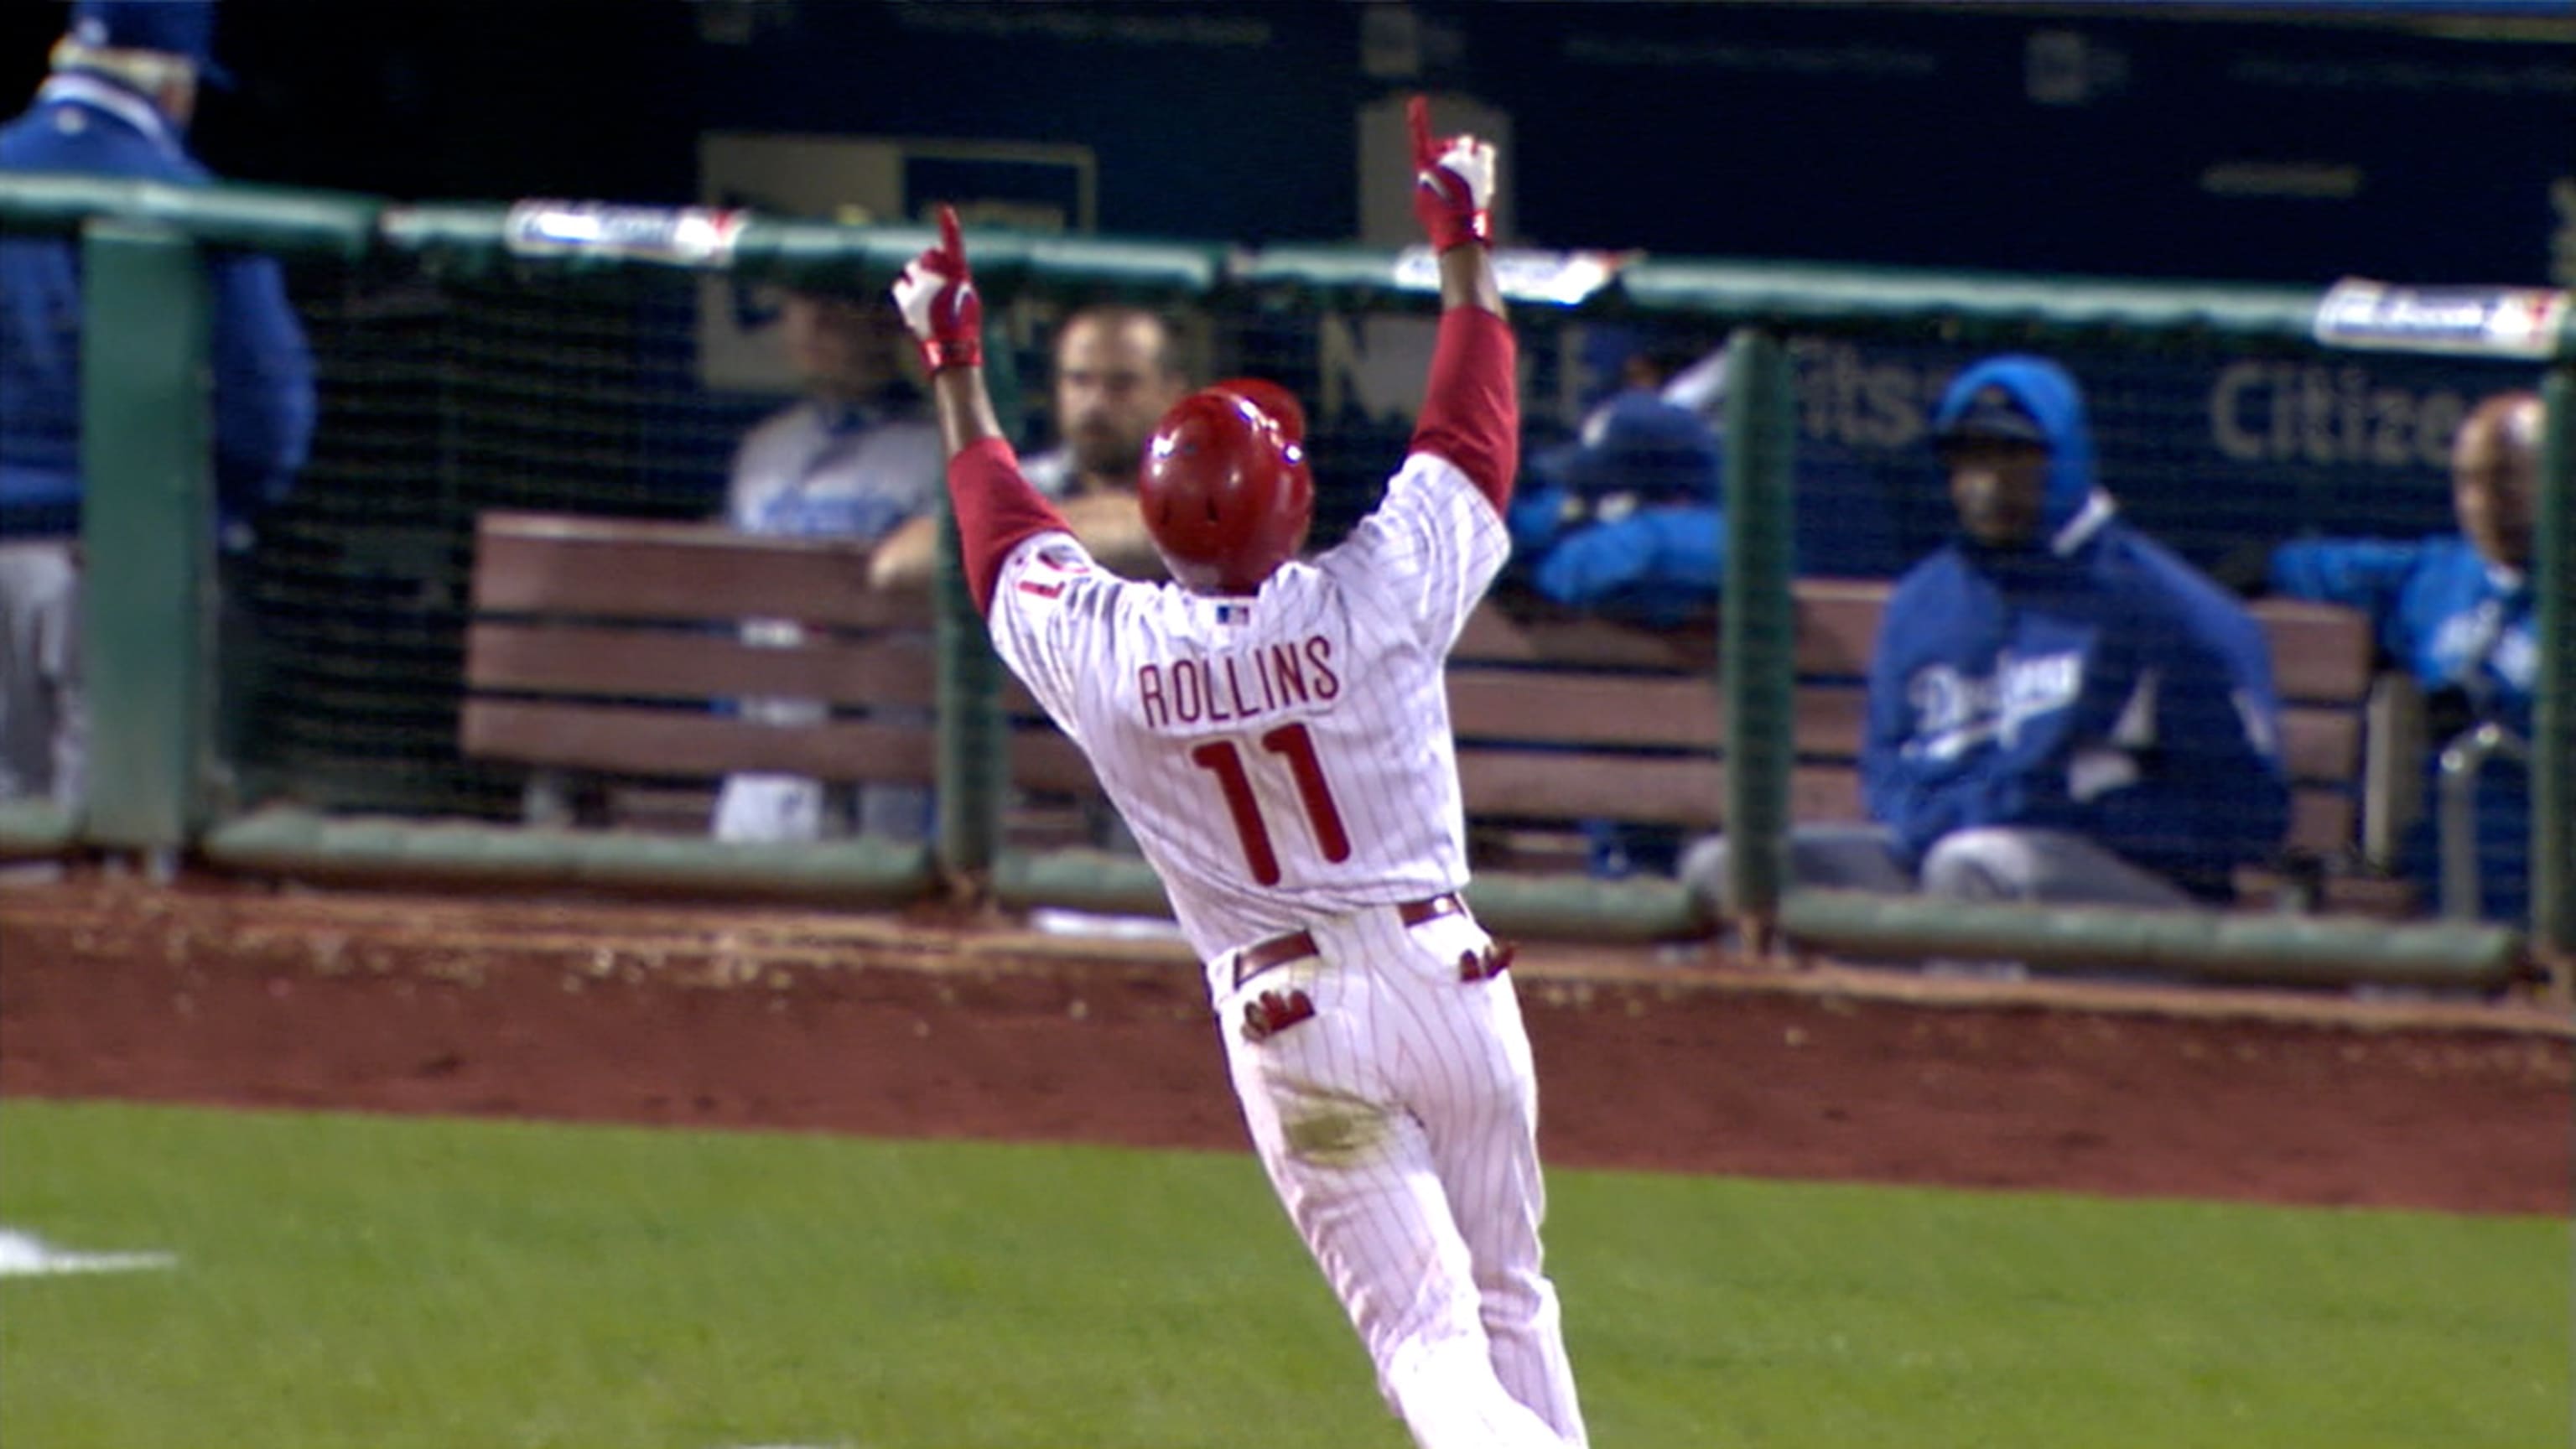 jimmy rollins phillies